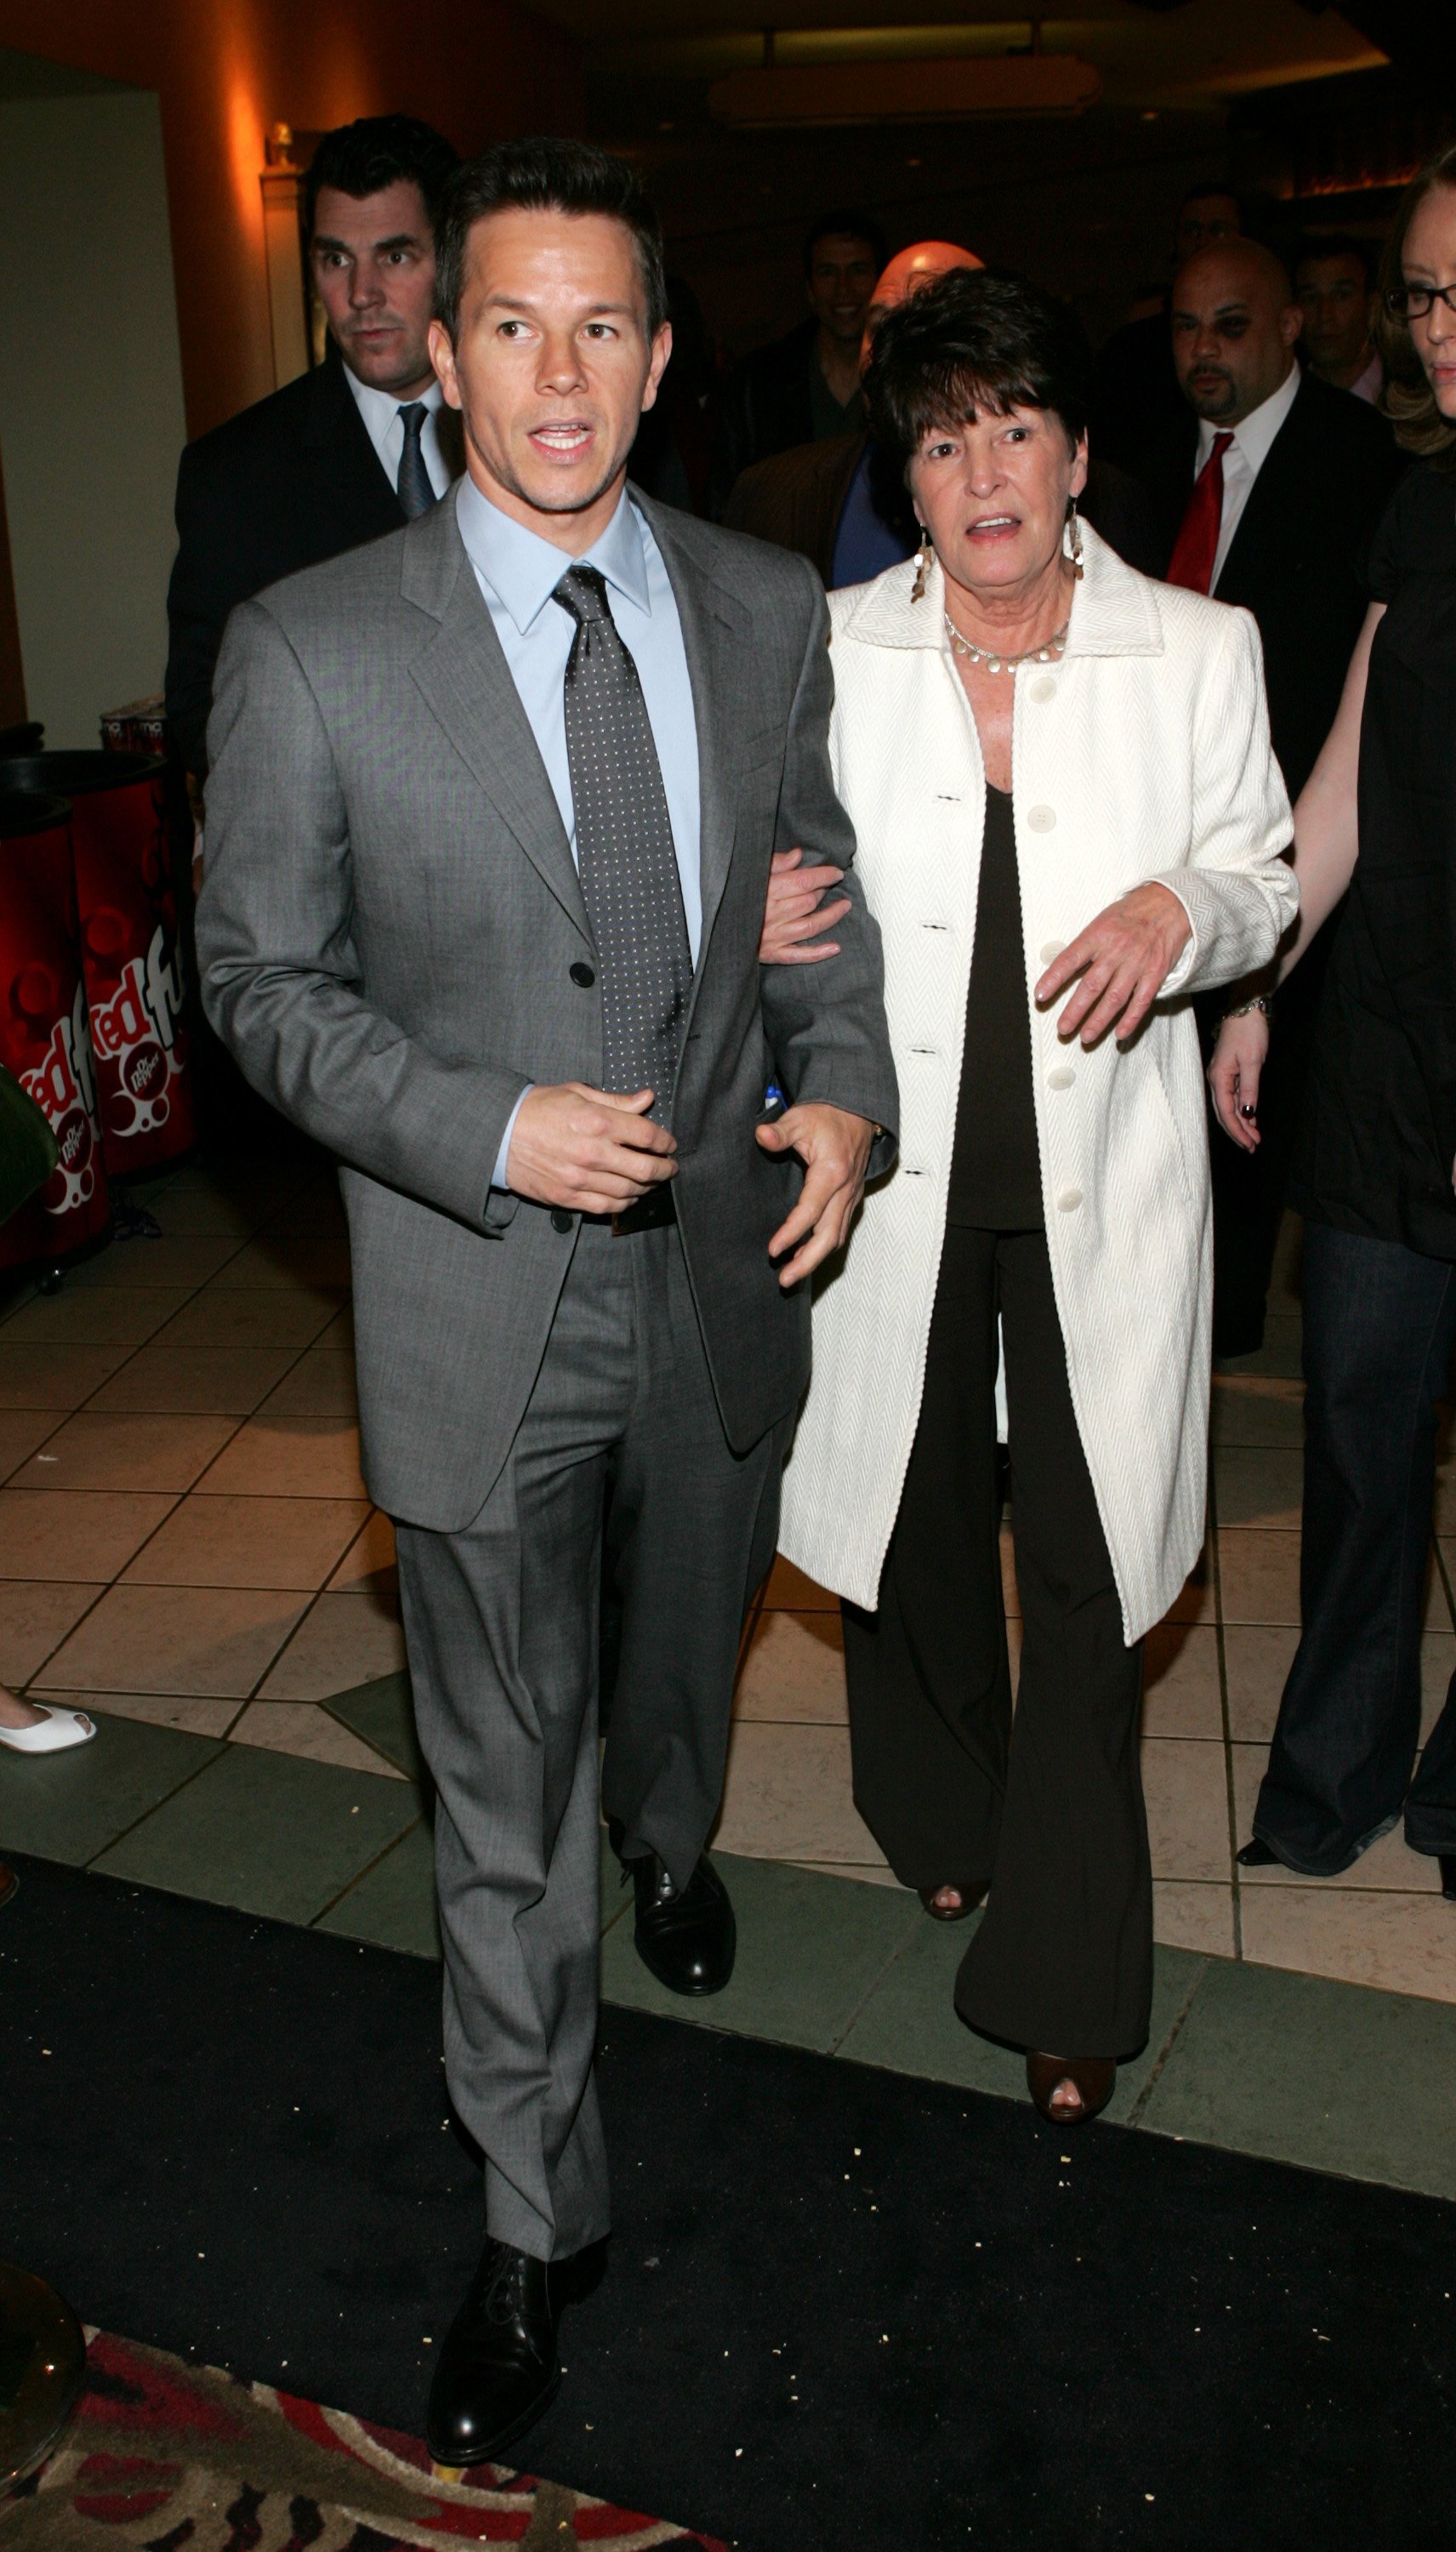 Mark Wahlberg and his mother, Alma attends the "Shooter" premiere at Loews Theatre Boston Common in Massachusetts on March 15, 2007. | Photo: Getty Images